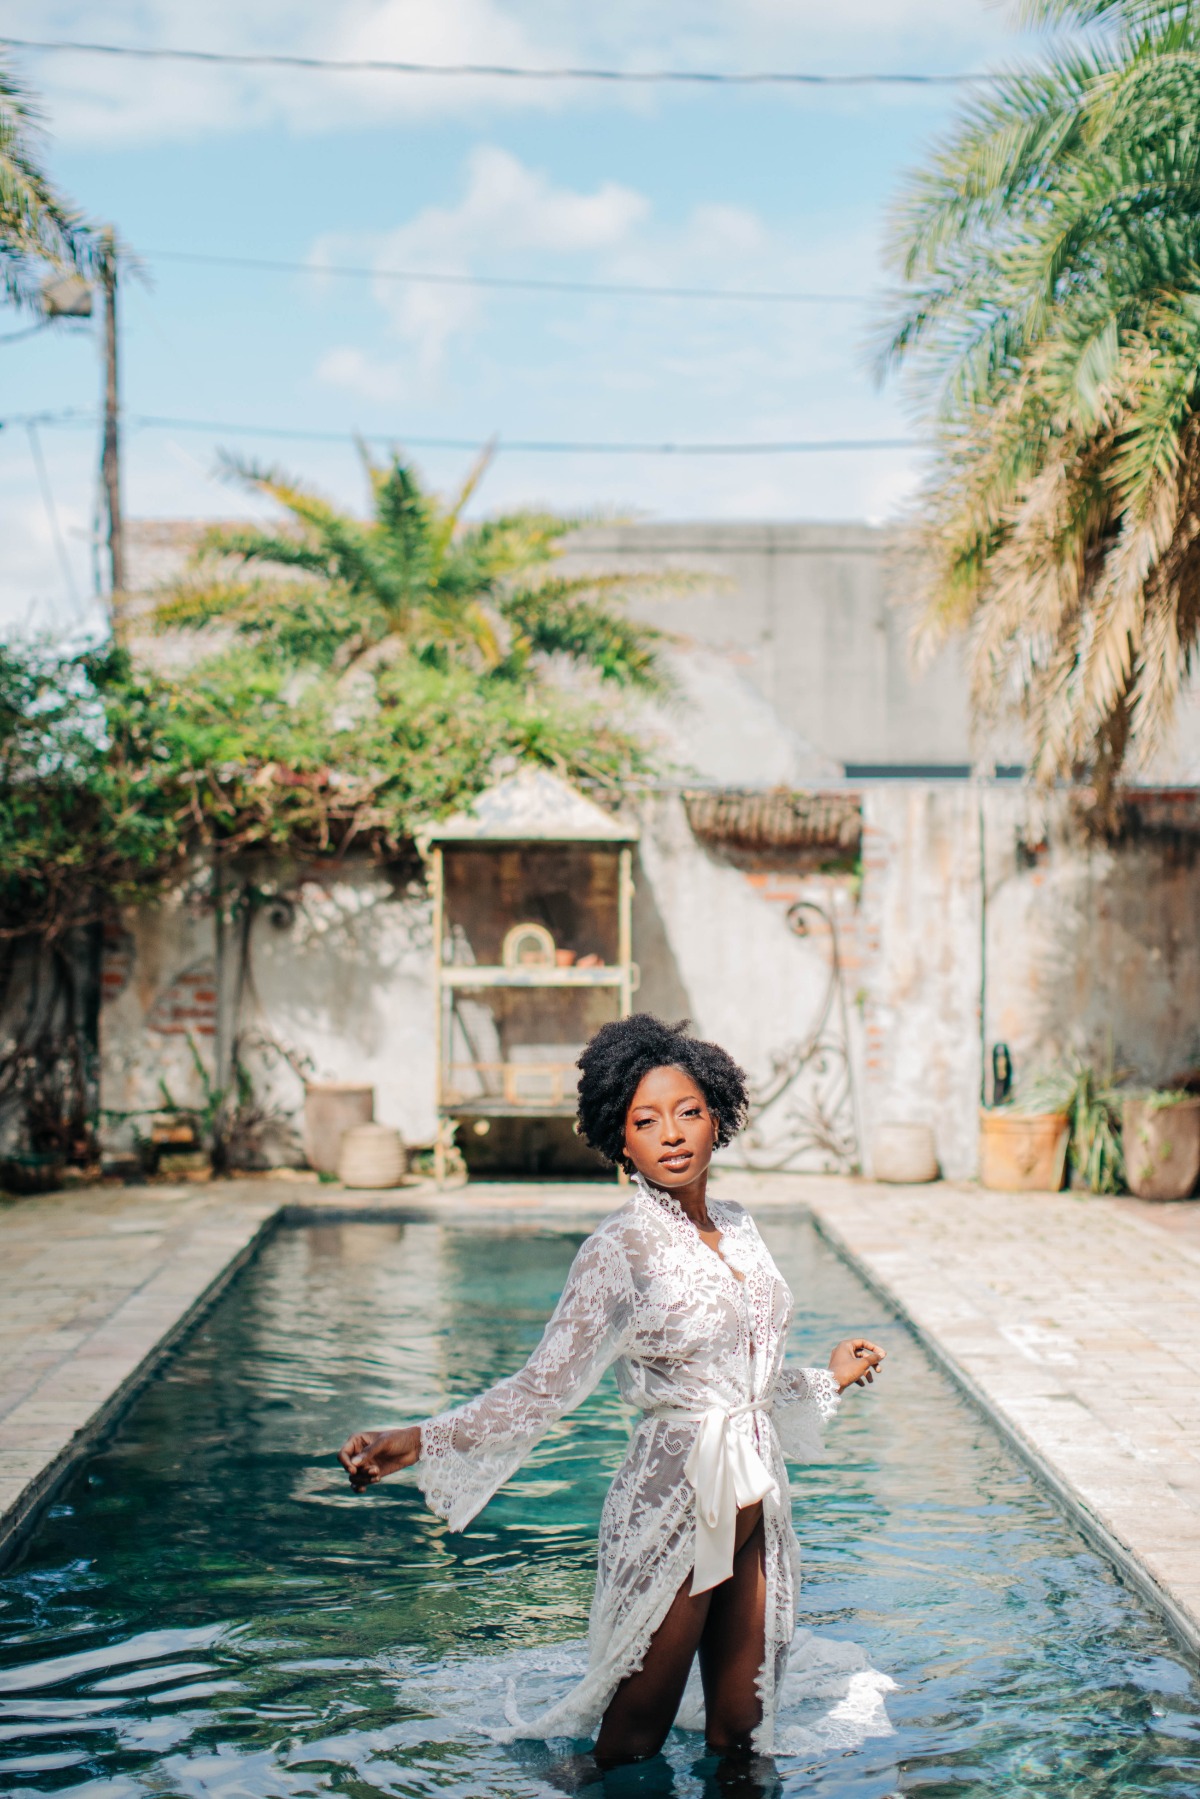 This Is Exactly How To Throw A Summer Wedding in NOLA for 6k